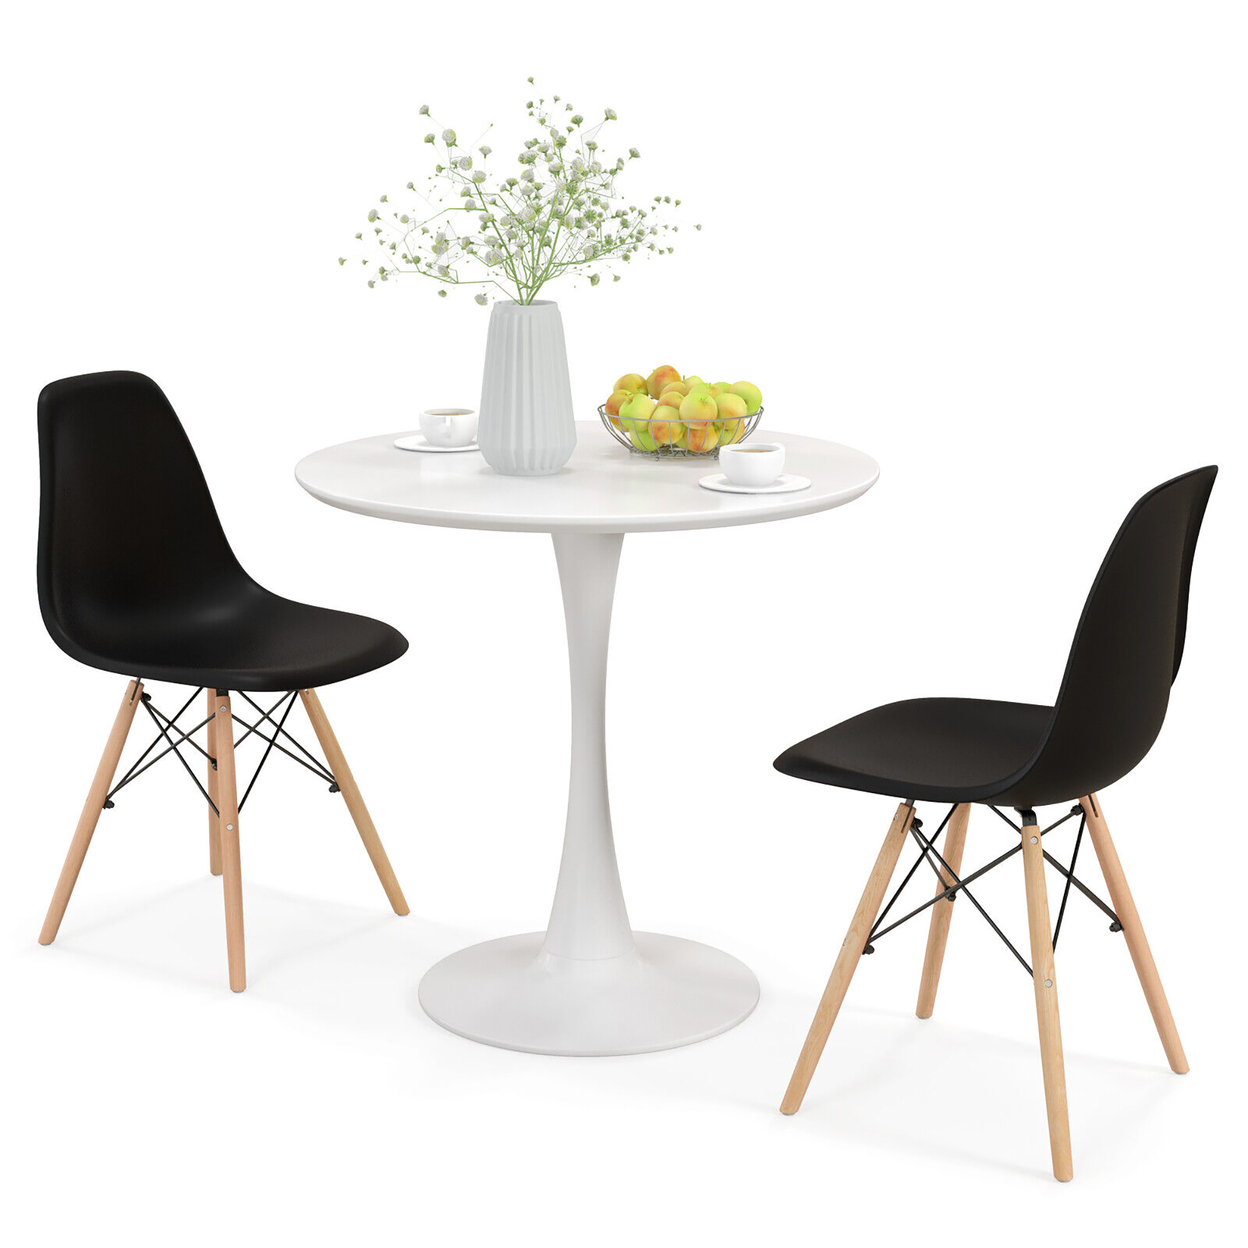 3 PCS Dining Set Modern Round Dining Table 2 Chairs For Small Space Kitchen